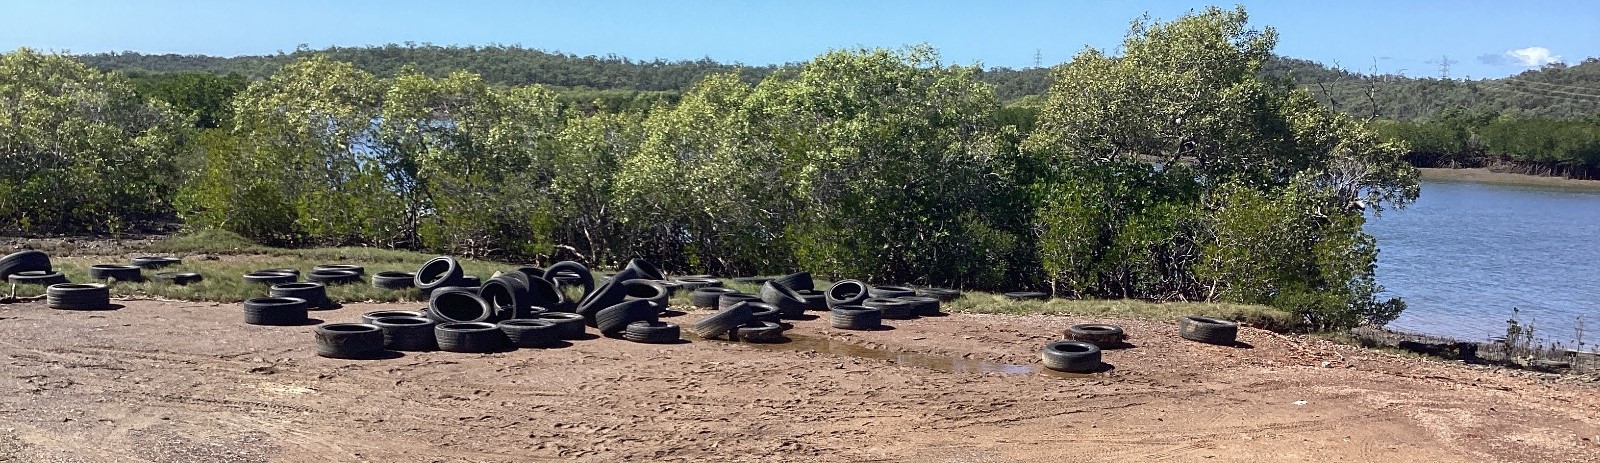 Illegal dumping of tyres south trees